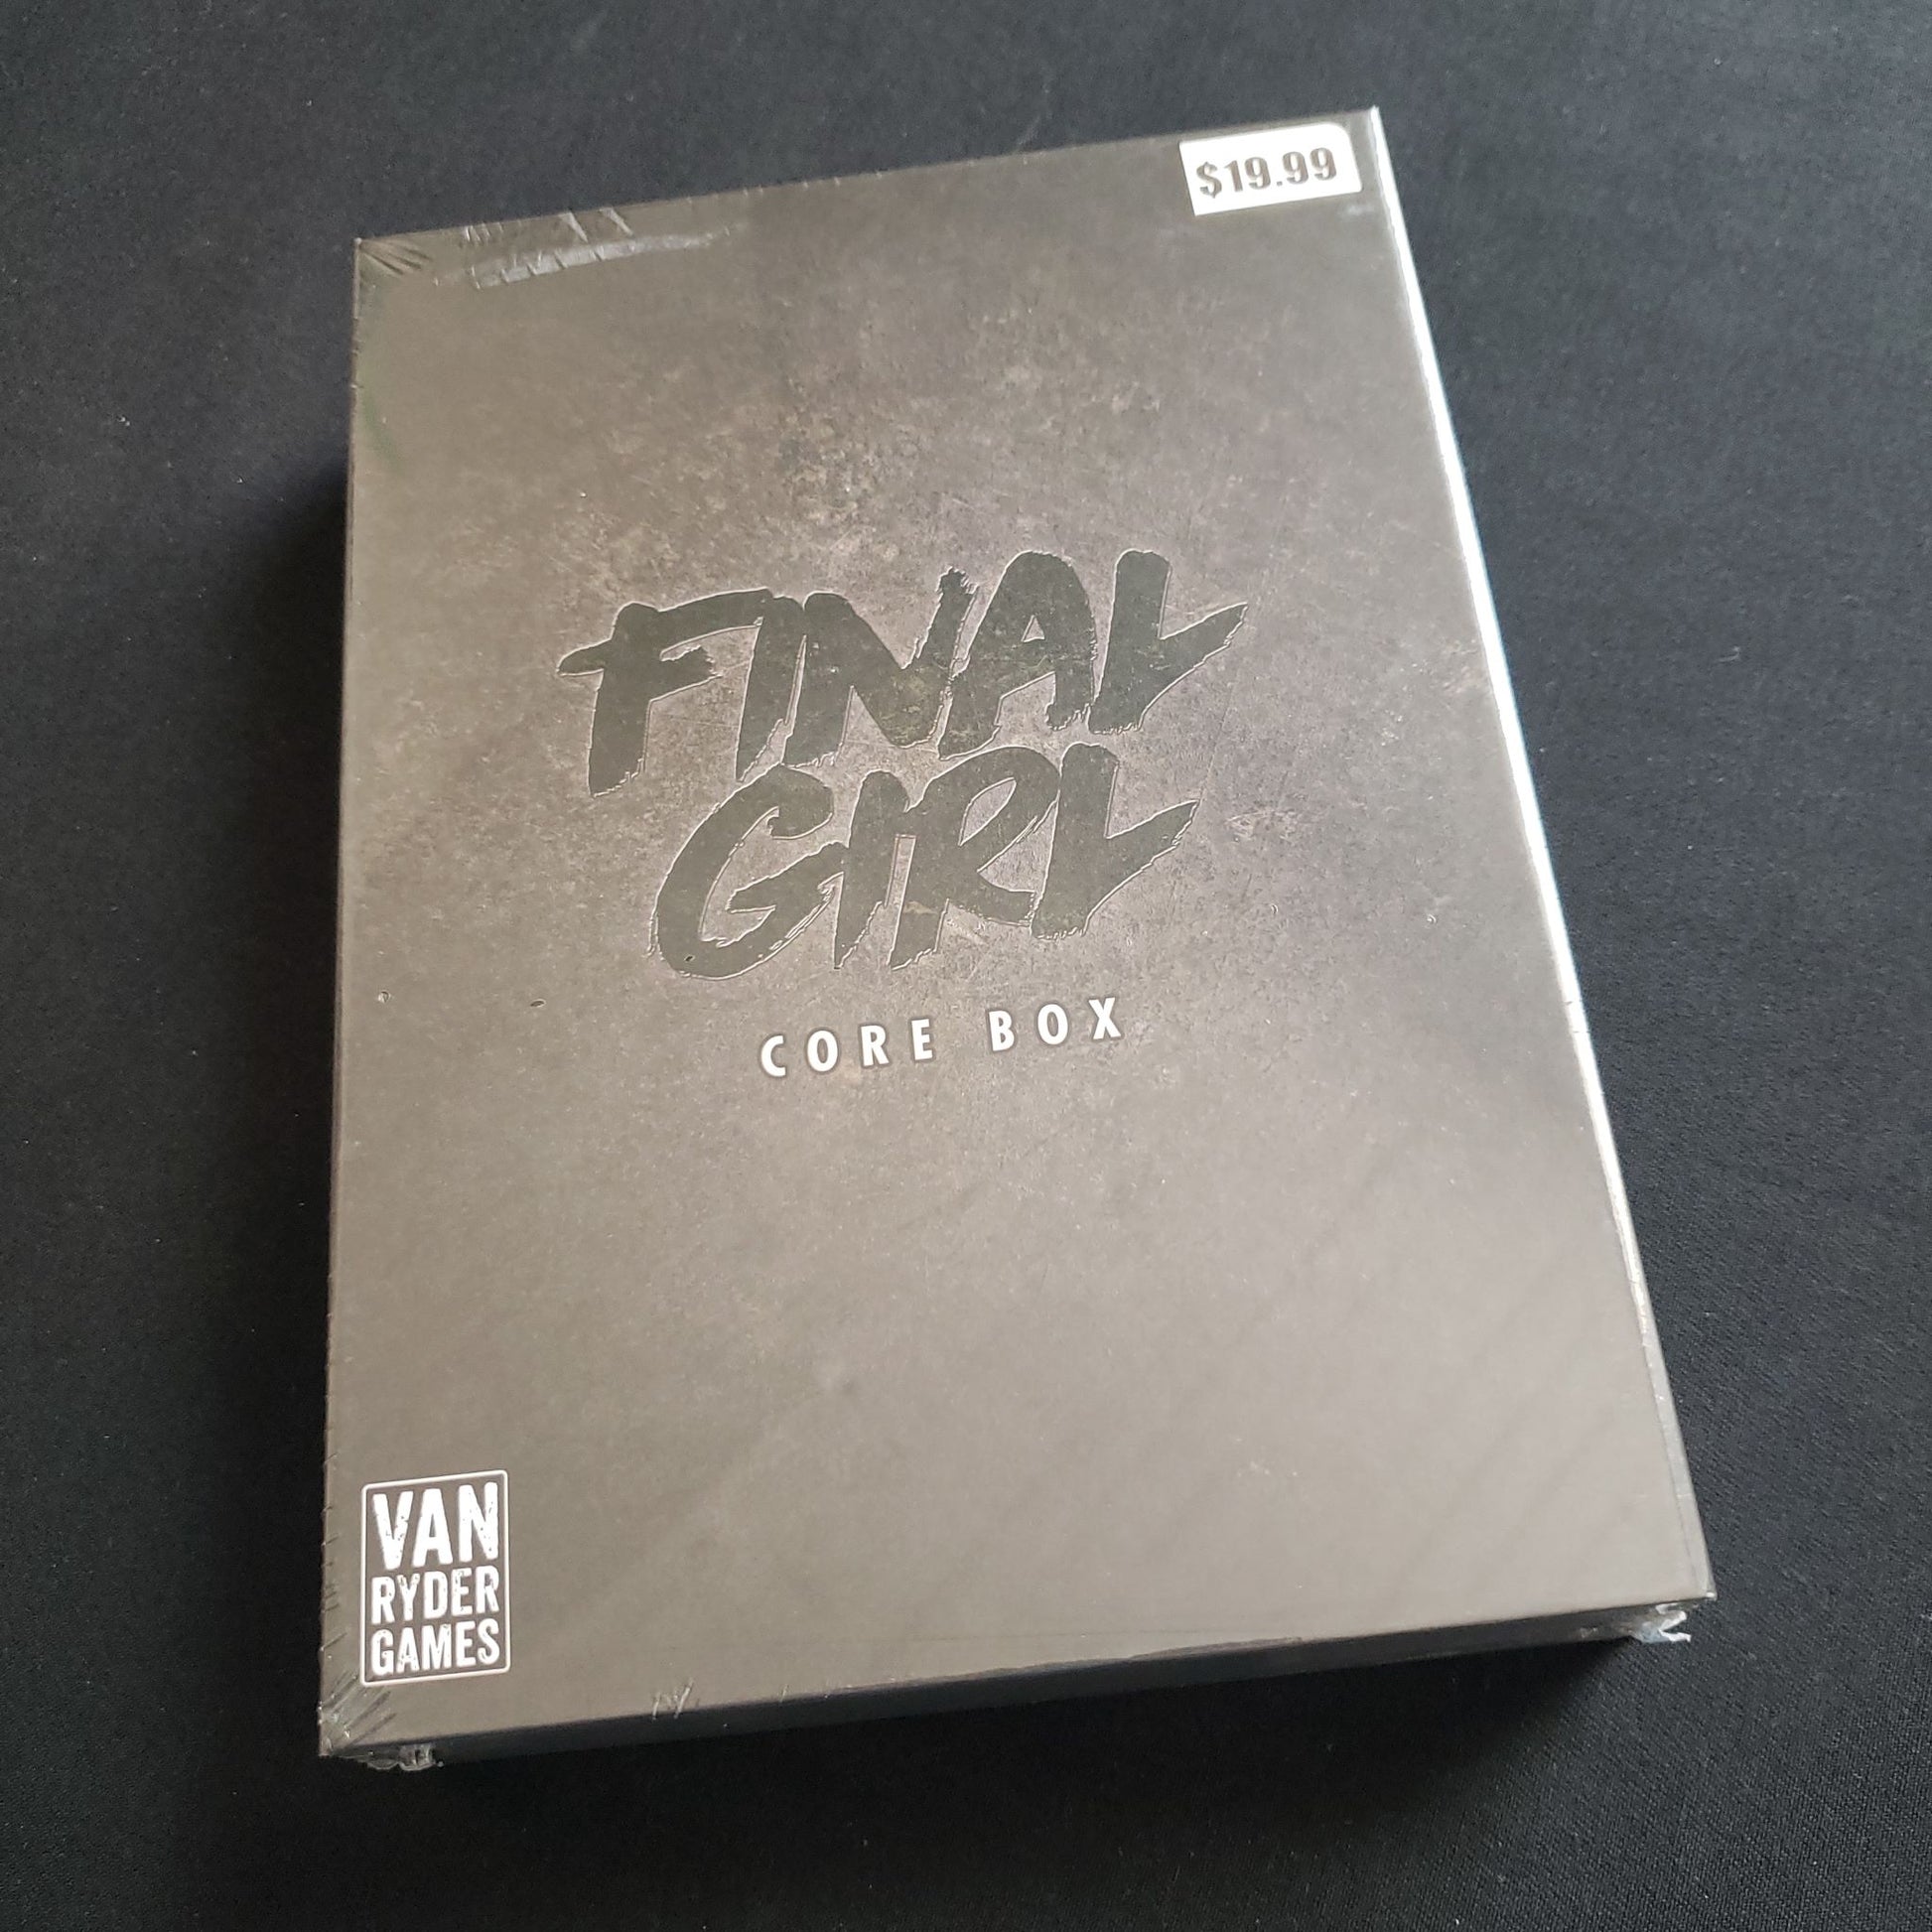 Final Girl board game Core box - front cover of box